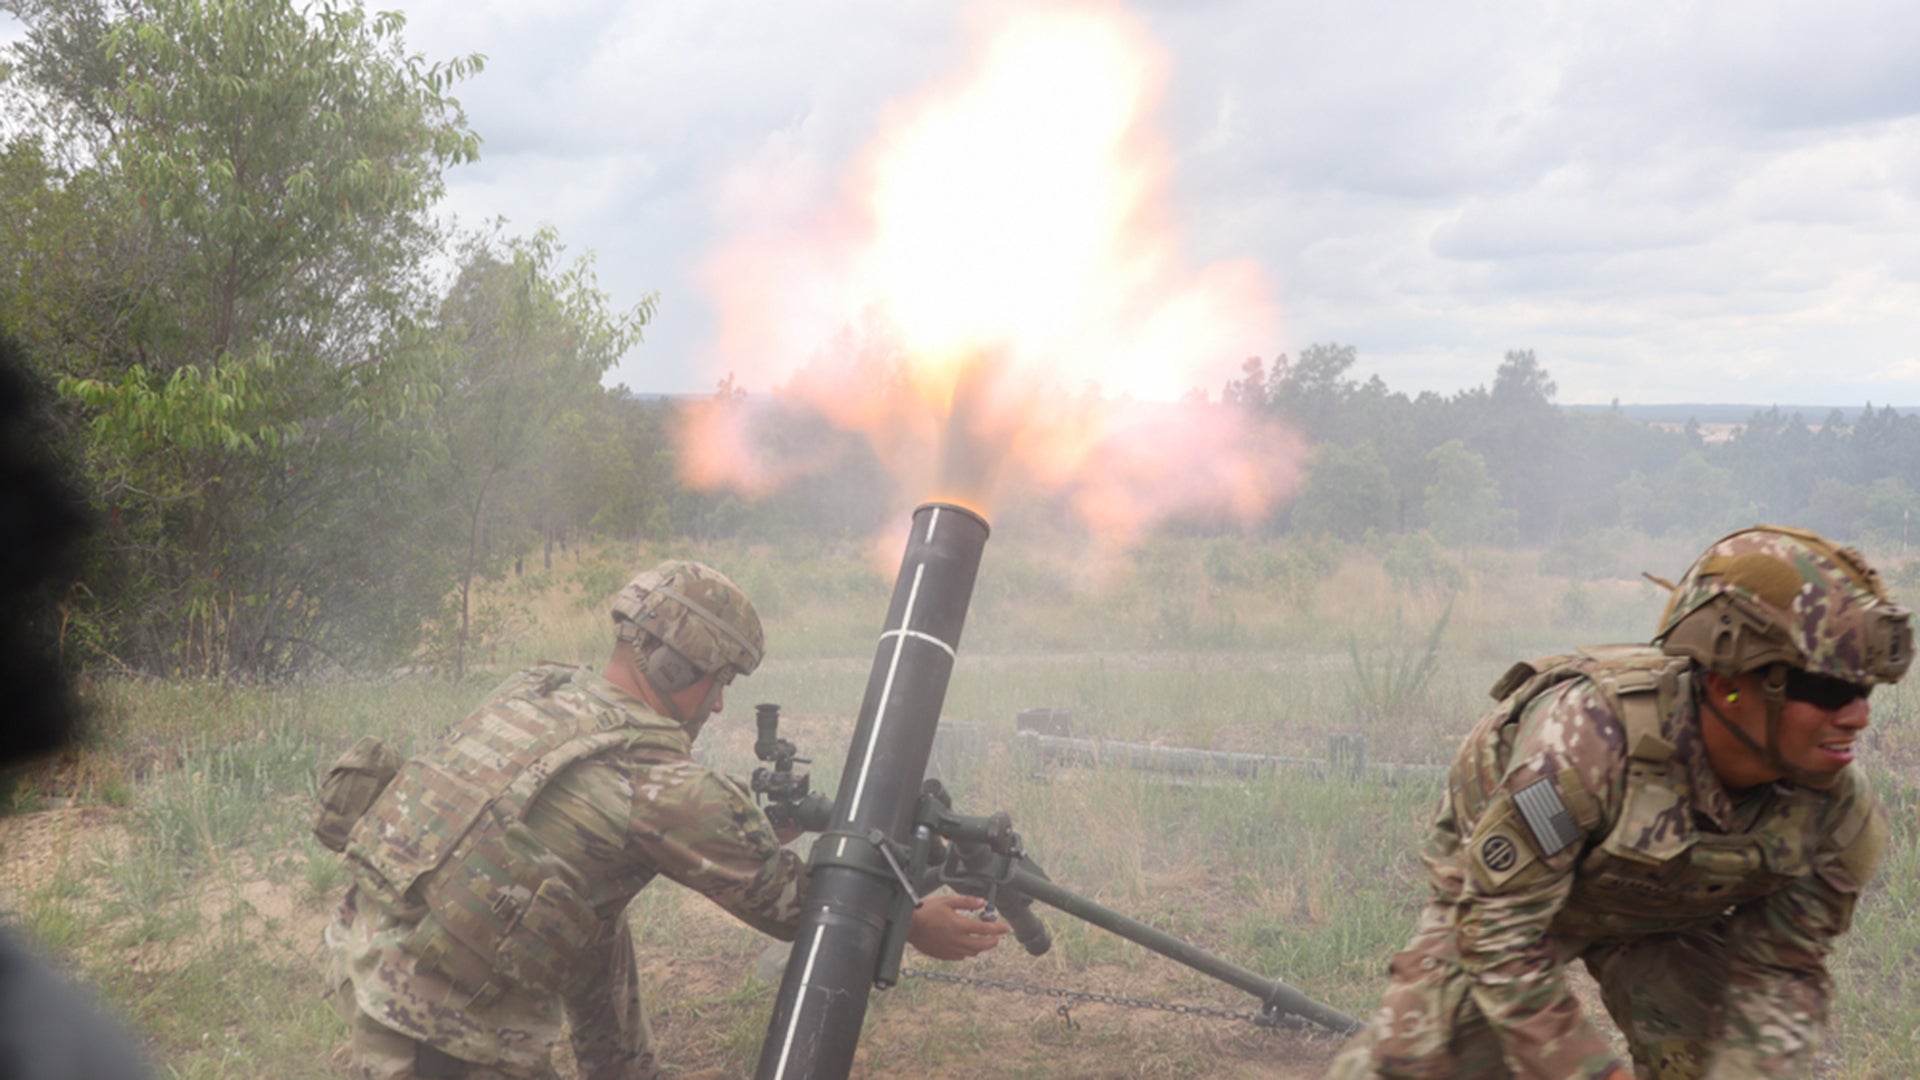 U.S. Army Pfc. Shane Roebuck, a Mortarman assigned to Bravo Troop, 1st Squadron, 73rd Cavalry Regiment (1-73 Cav), 2nd Brigade Combat Team, 82nd Airborne Division fires a 120mm mortar on Fort Bragg, North Carolina, June 2, 2021. 1-73 Cav conducted mortar live fire exercises for combat training and recertification of their weapons systems. (U.S. Army Photo by Spc. Jacob Ward)